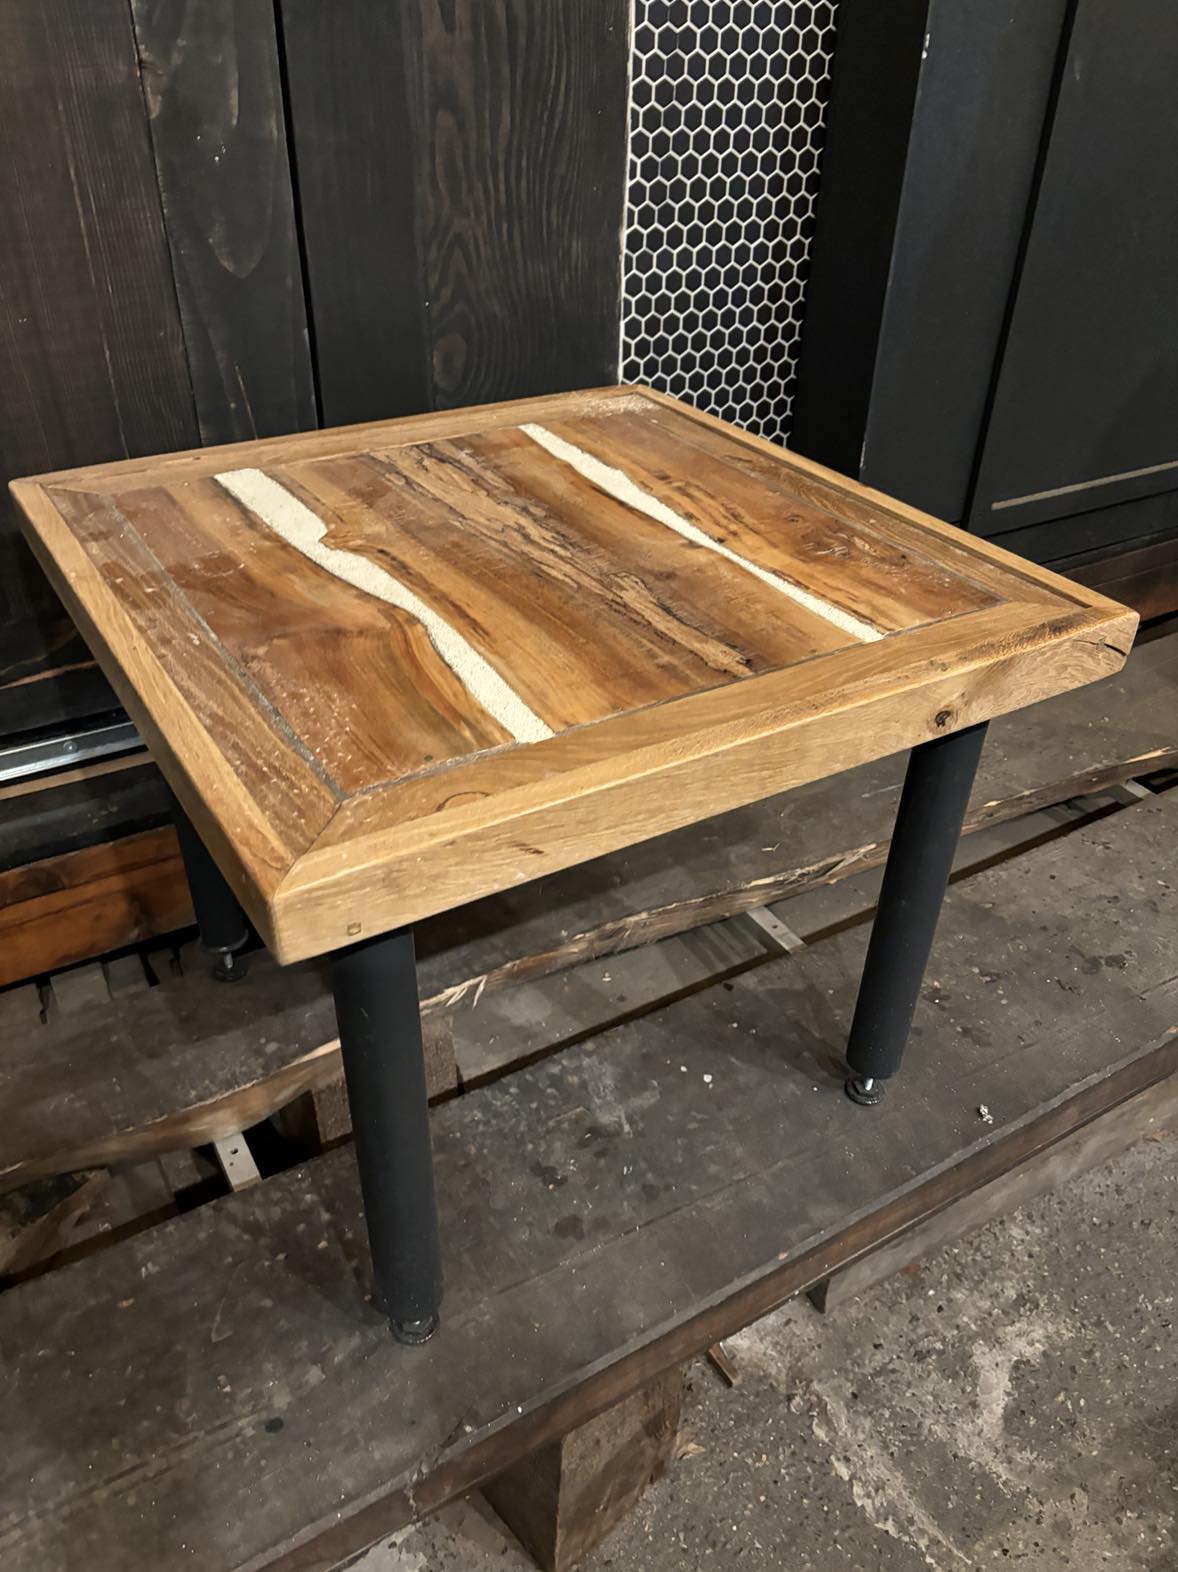 Raffle Ticket for High-end Concrete River Live Edge Table - South Island Angels Fundraiser